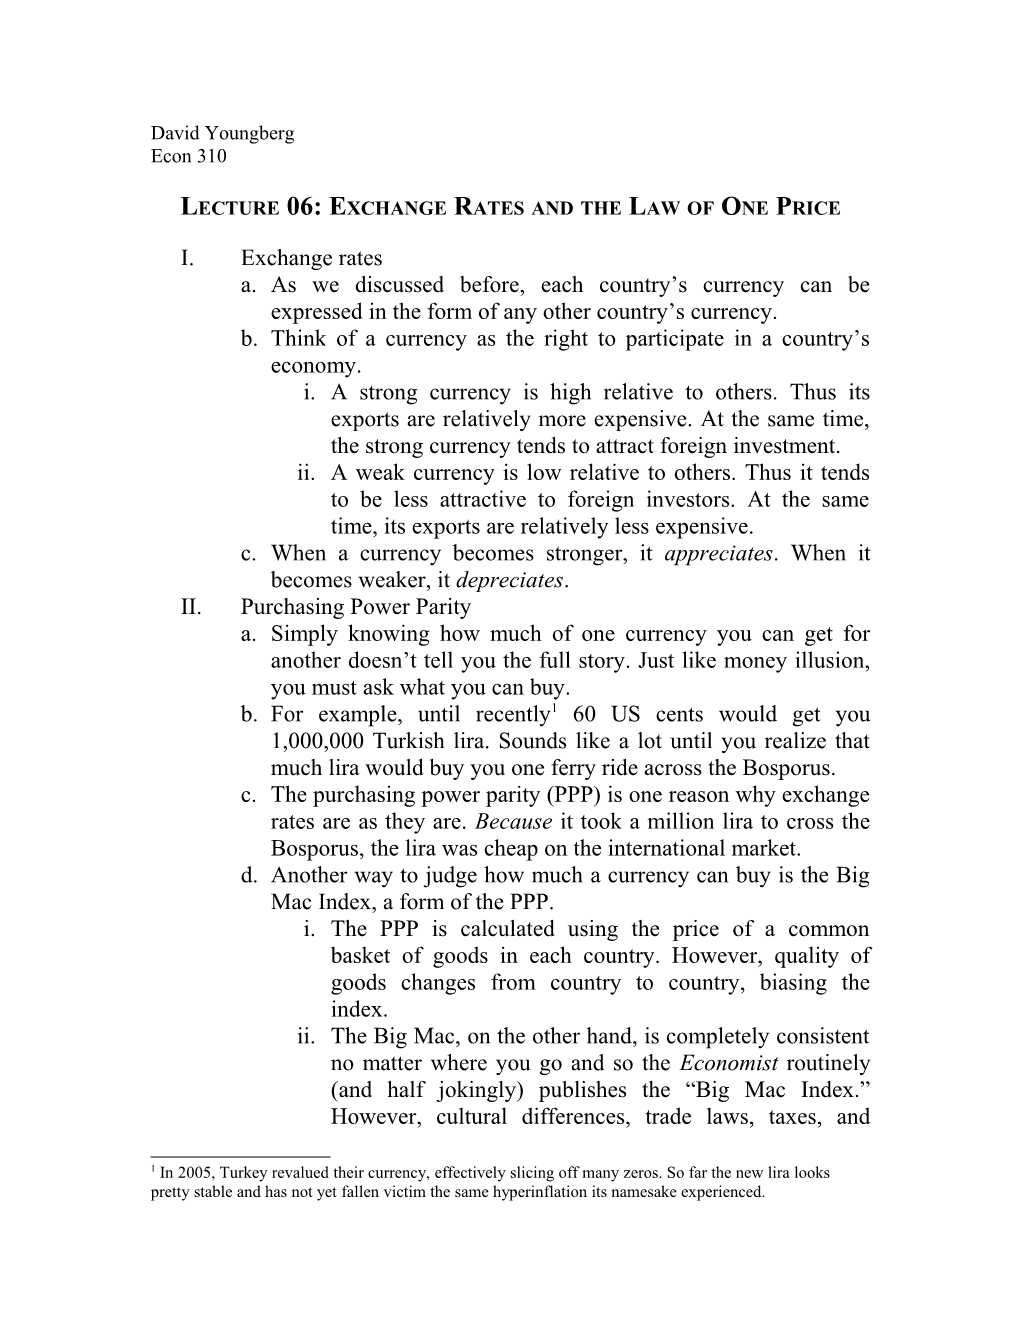 Lecture 06: Exchange Rates and the Law of One Price